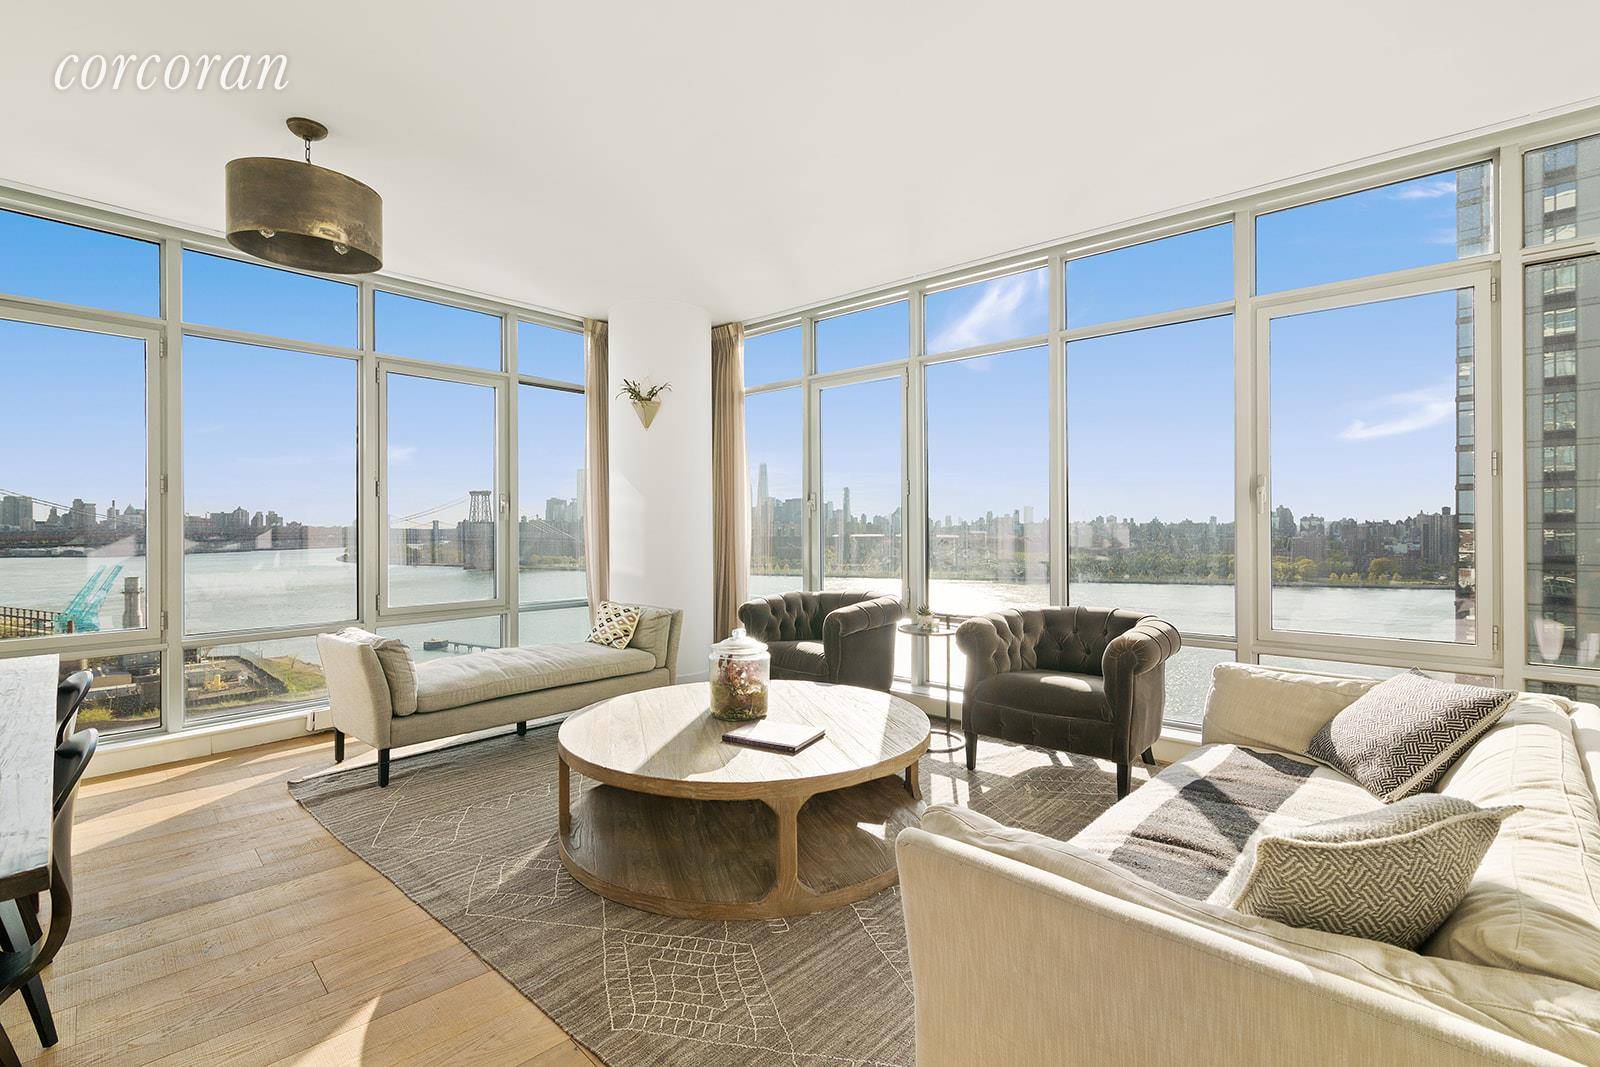 Panoramic city and river views from this mint condition condo with large balcony at Northside Piers !